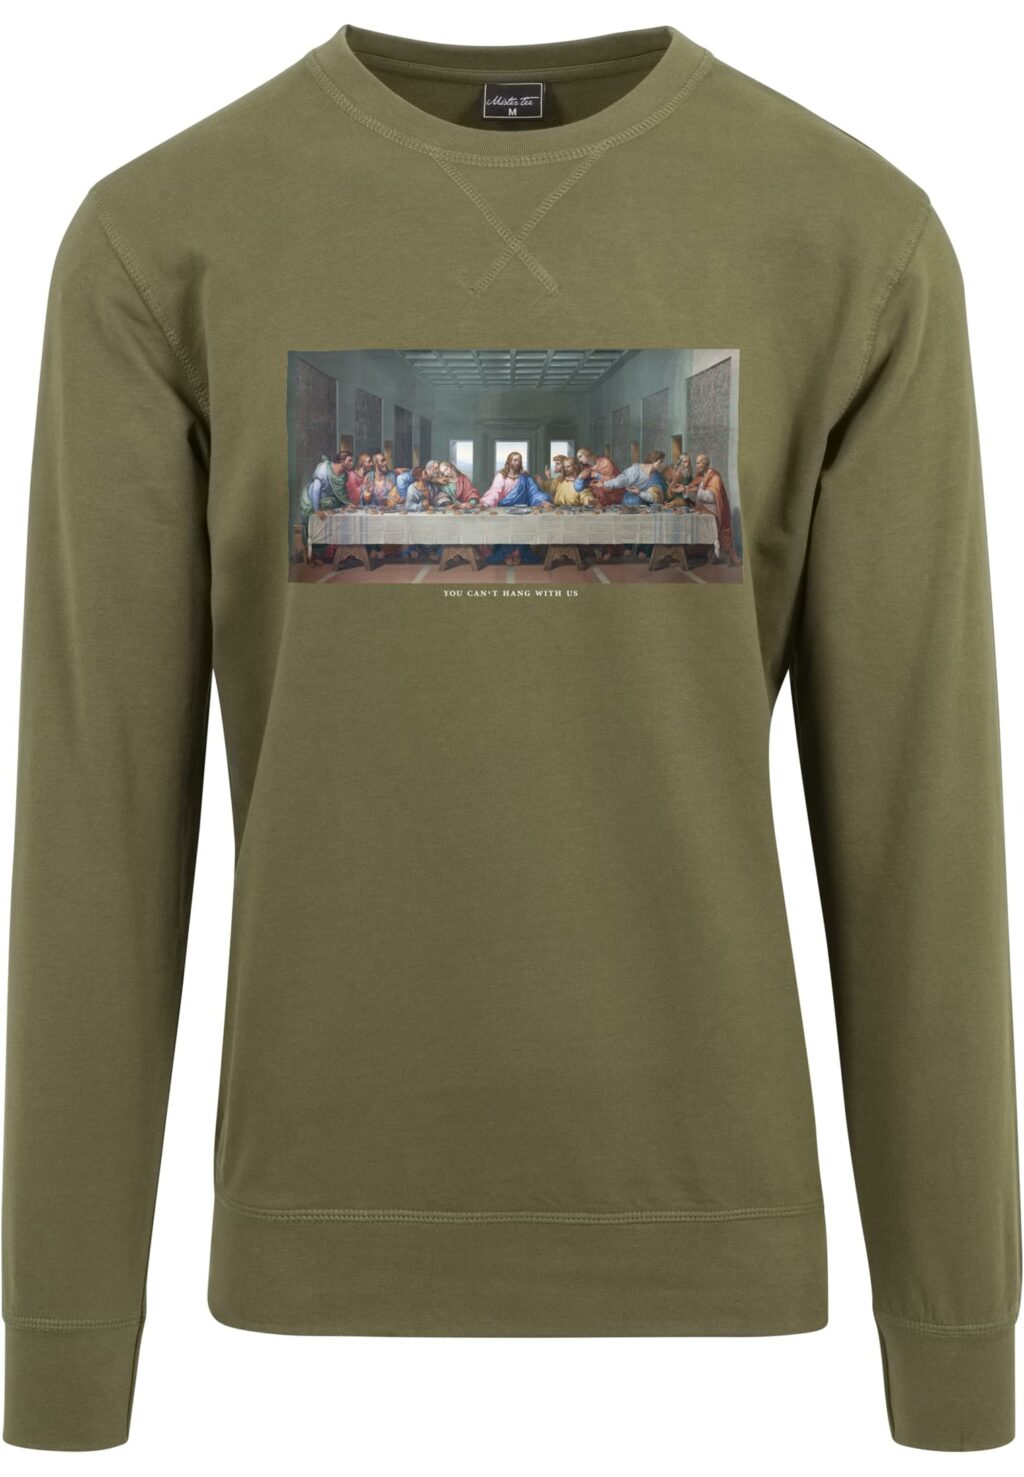 Can´t Hang With Us Crewneck olive MT2573